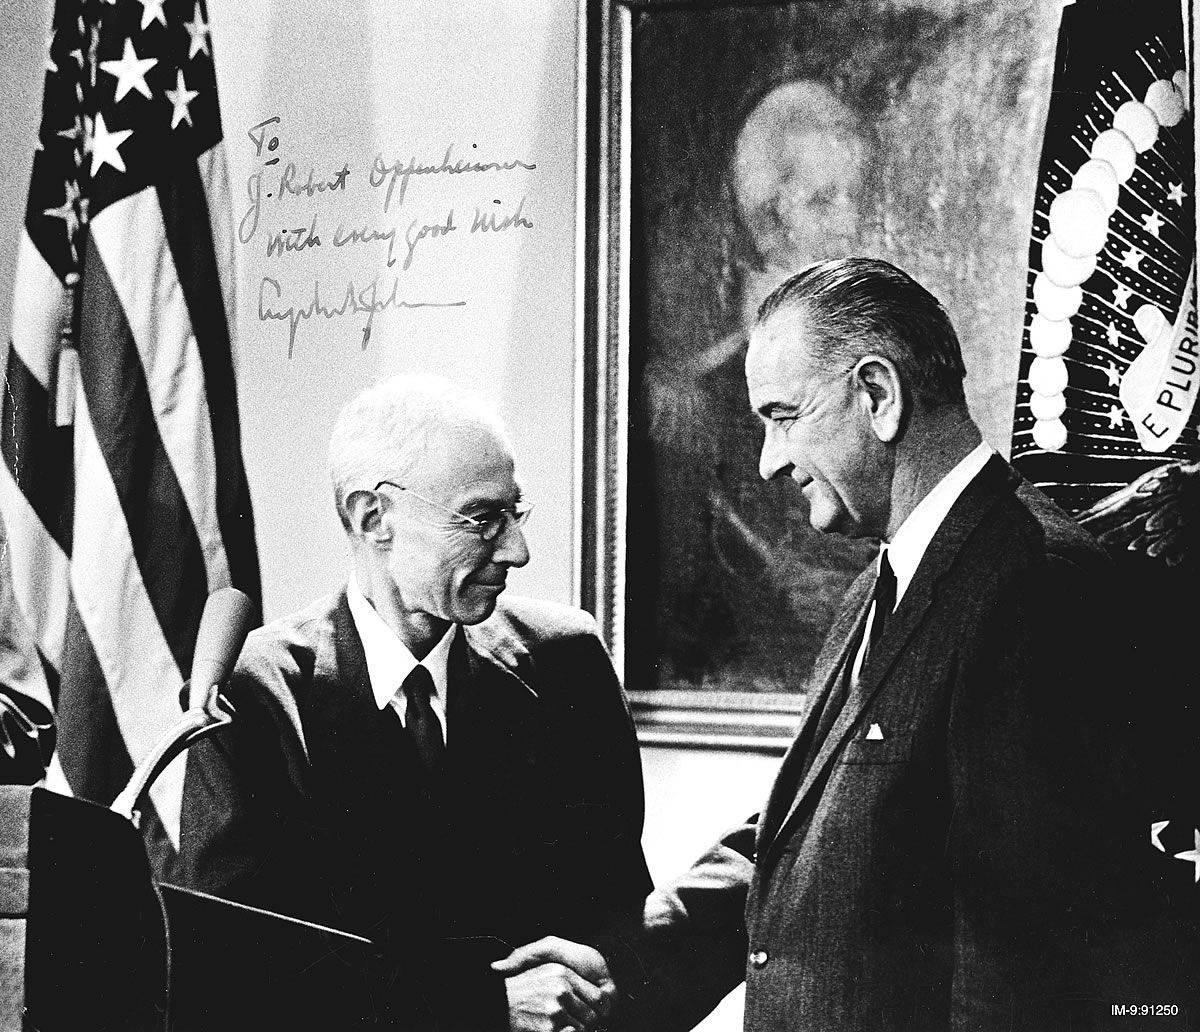 Oppenheimer receiving the Atomic Energy Commission's 1963 Fermi prize